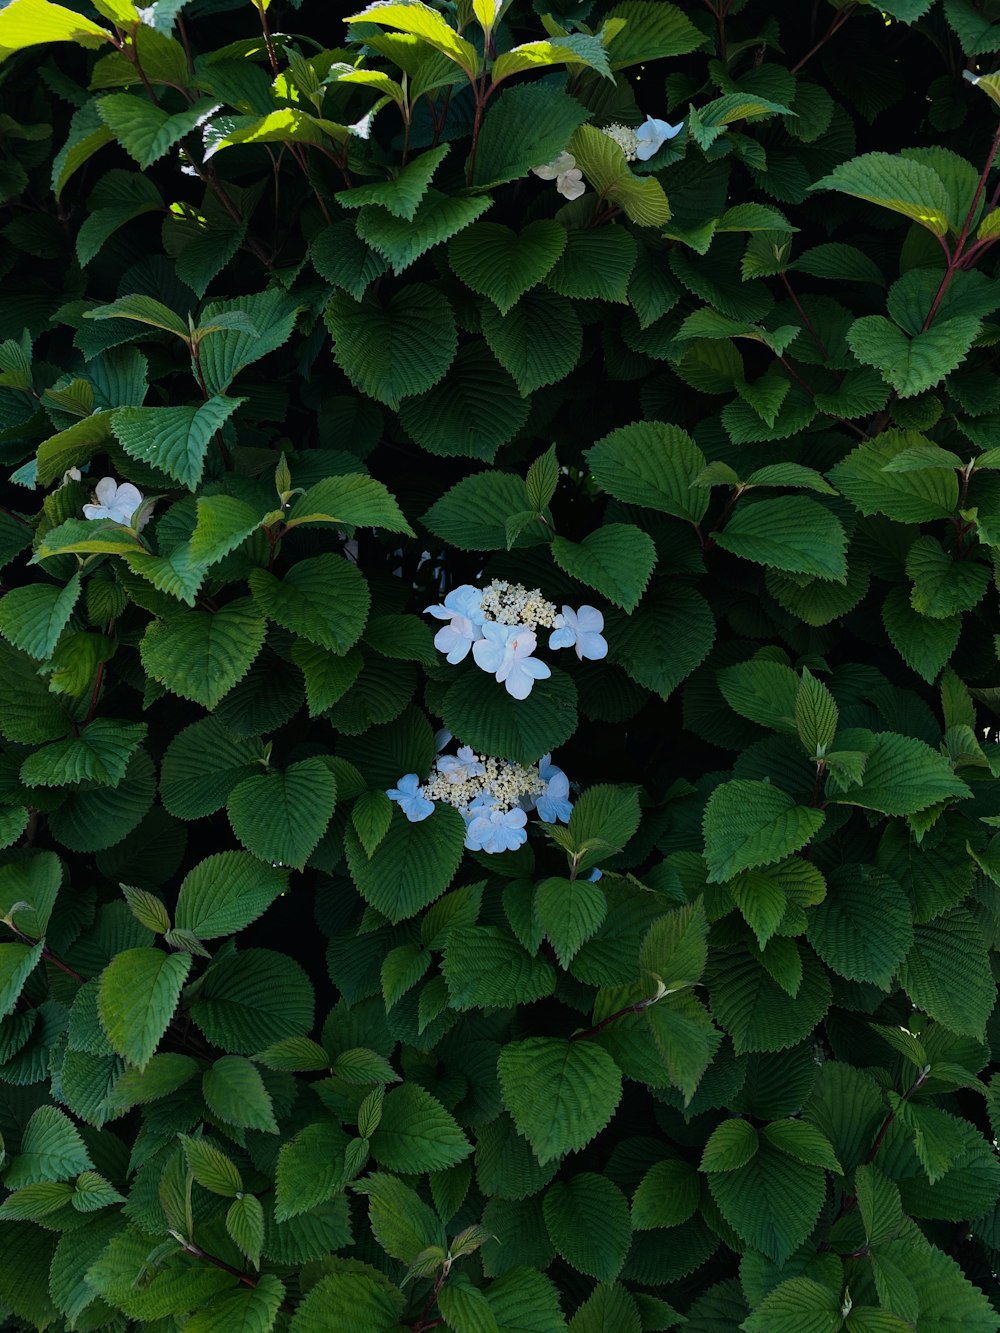 blue and white flowers with green leaves